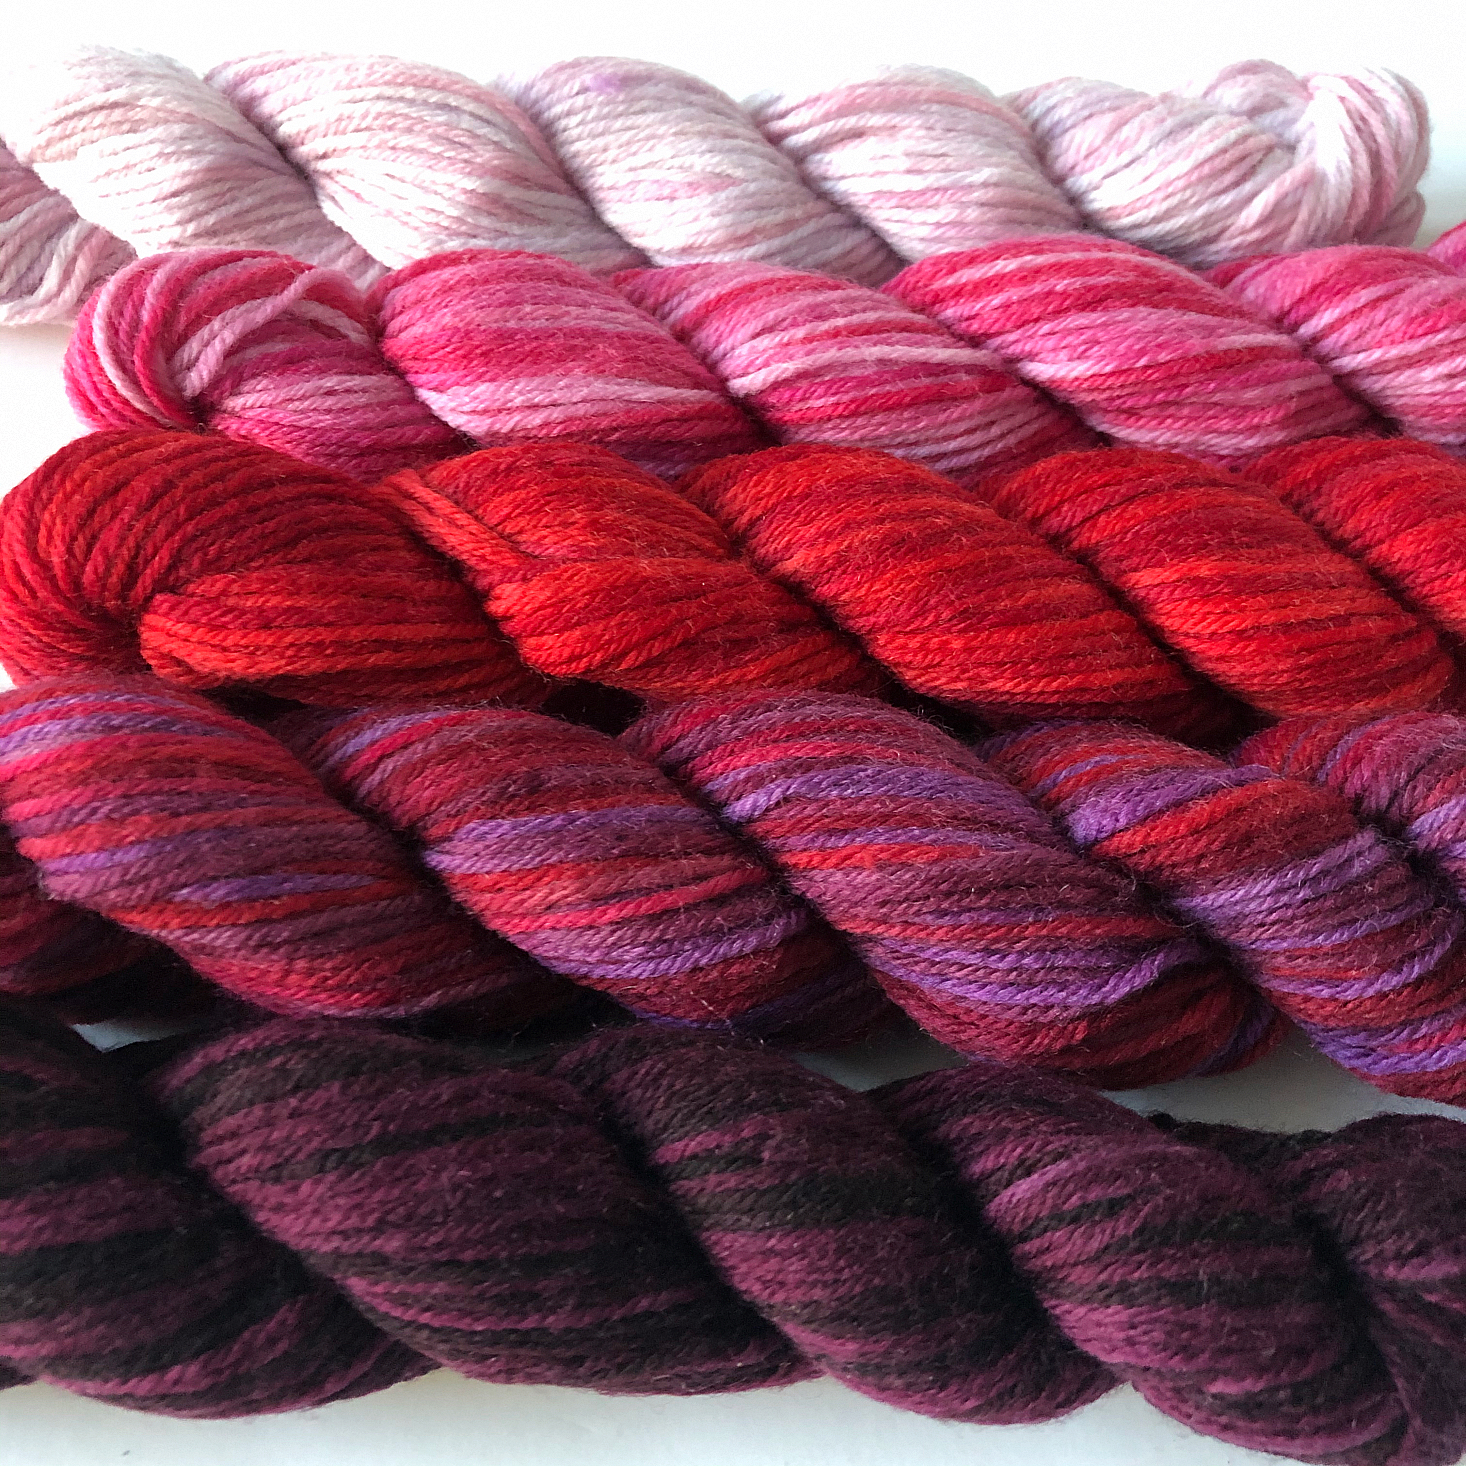 Knit Picks Review October 2019 red minis three